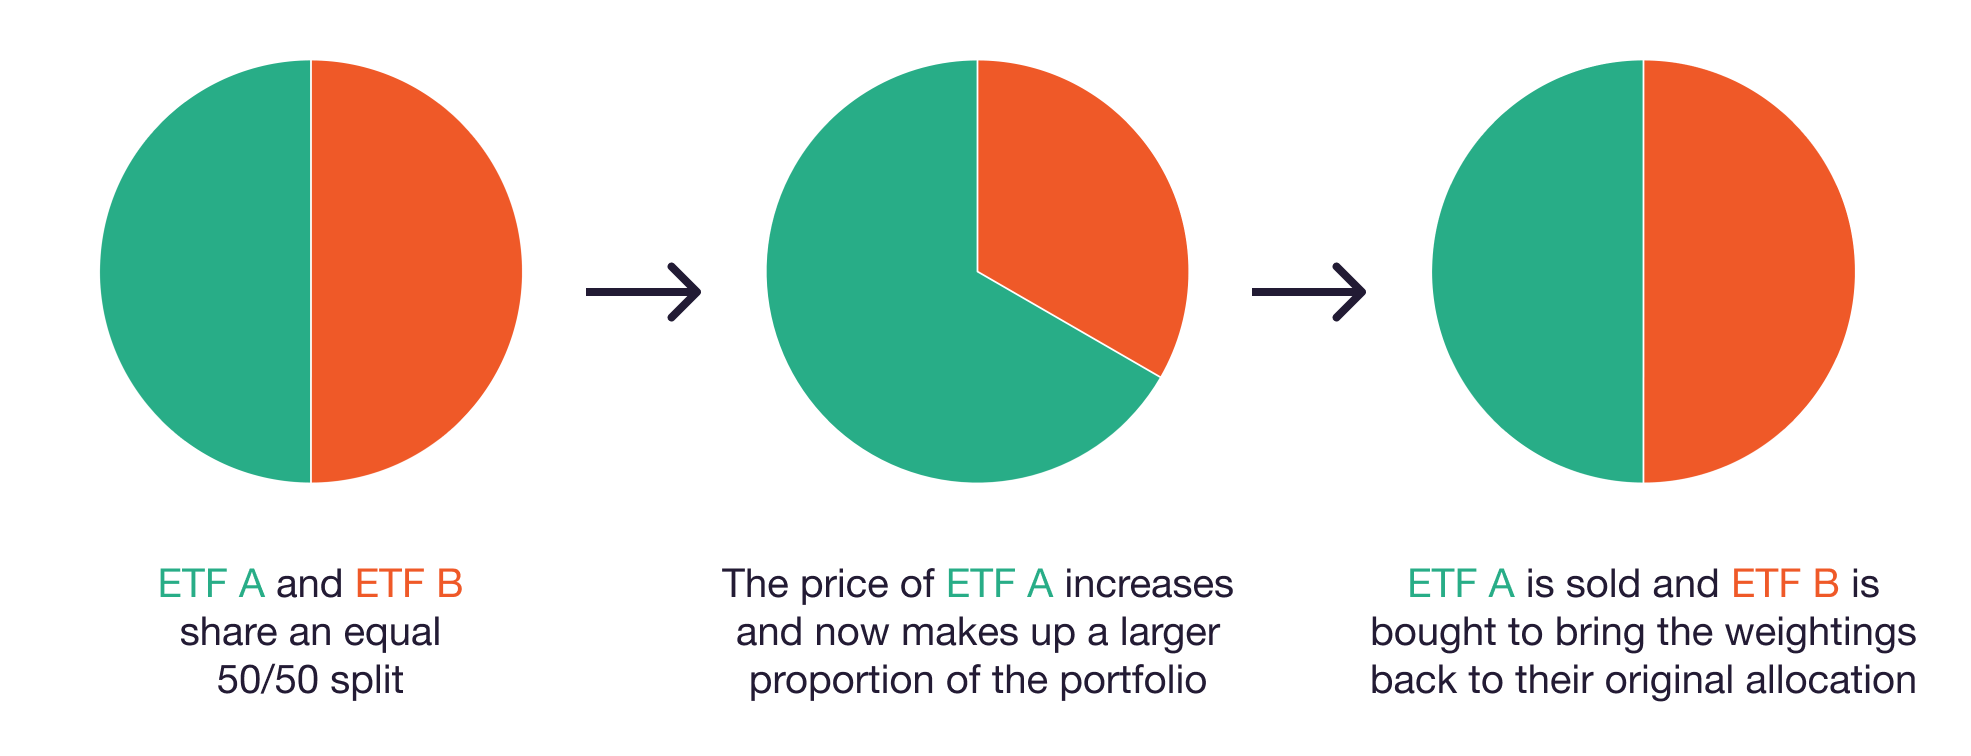 Diagram of the rebalancing process. ETF A and ETF B share an equal 50/50 split. The price of ETF A increases and now makes up a larger proportion of the portfolio. ETF A is sold and ETF B is bought to bring the weightings back to their original allocation.